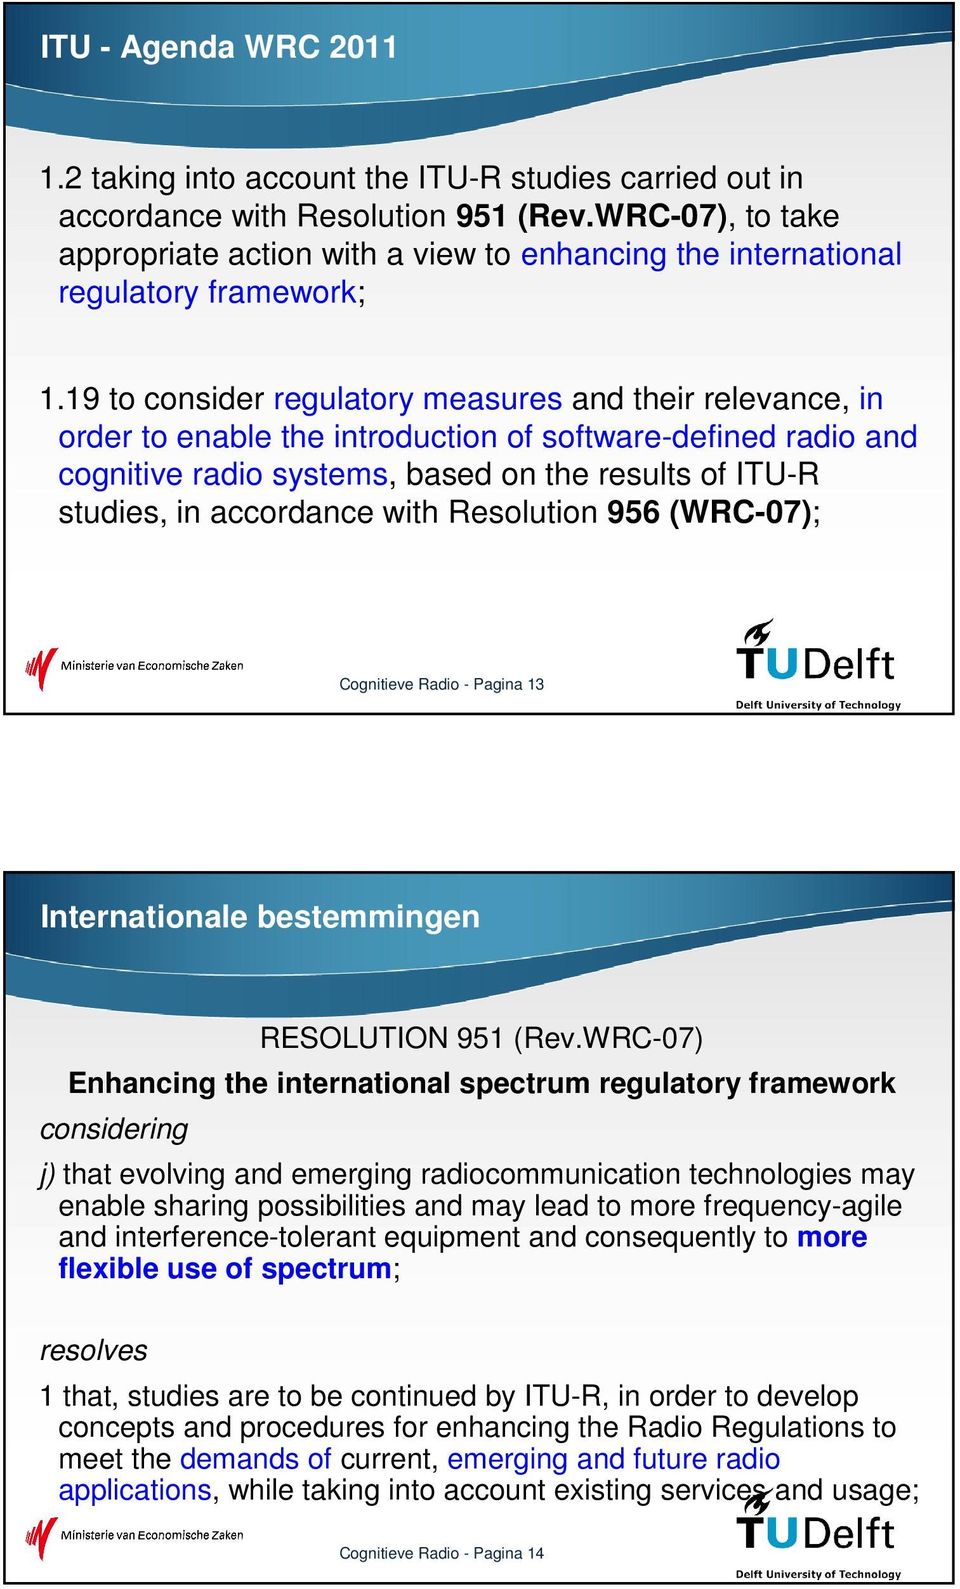 19 to consider regulatory measures and their relevance, in order to enable the introduction of software-defined radio and cognitive radio systems, based on the results of ITU-R studies, in accordance